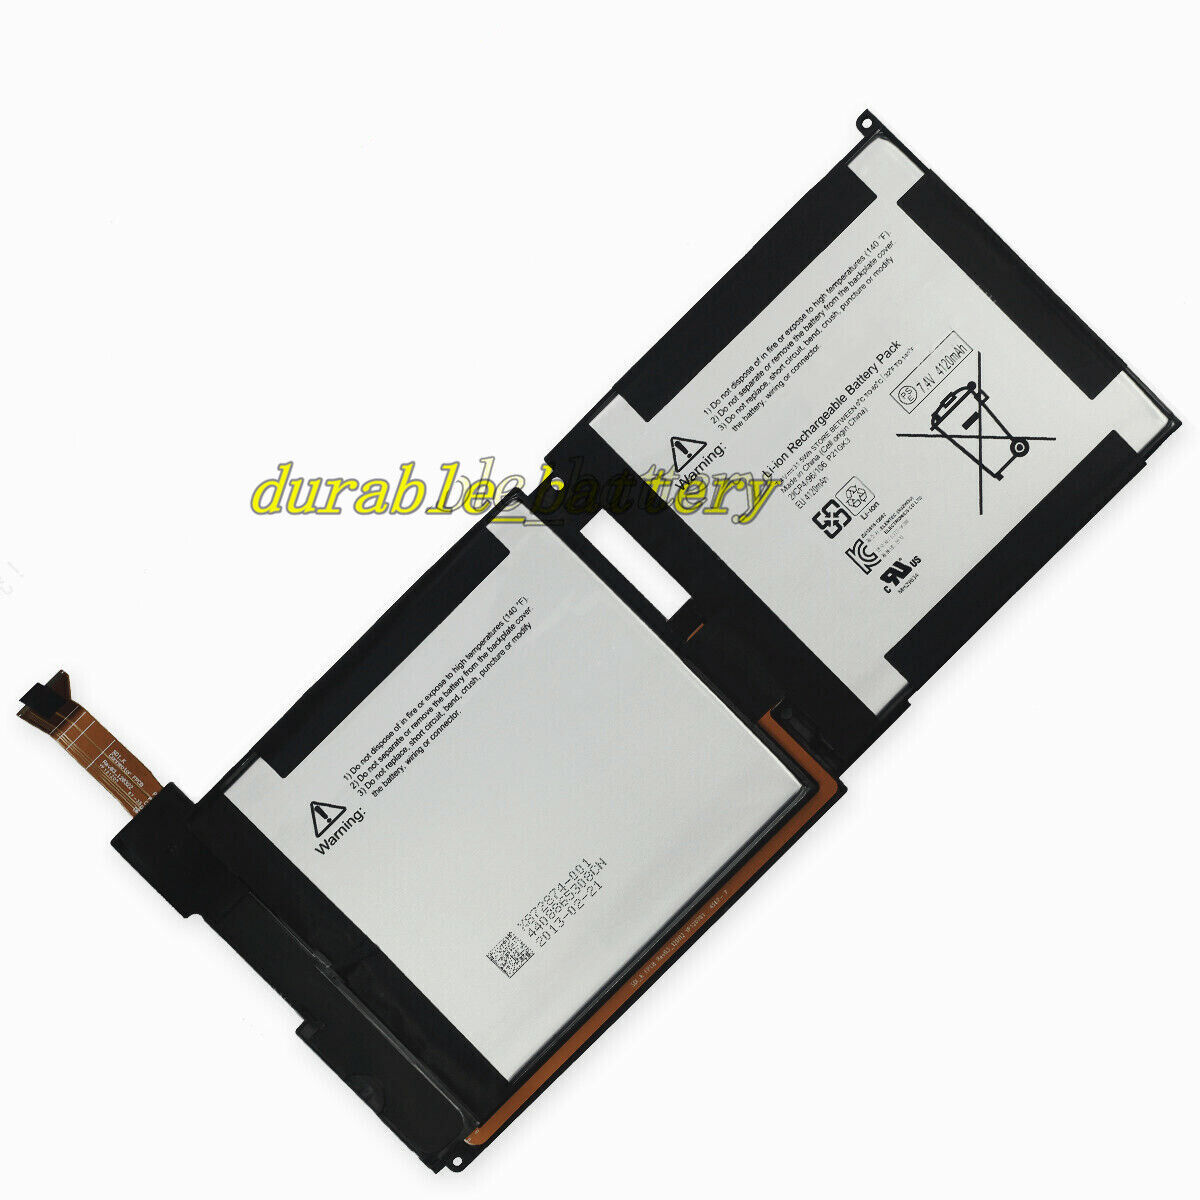 New Battery For Microsoft Surface RT 2 Surface Pro 1 2 3 4 5 6 7 7+ All Series